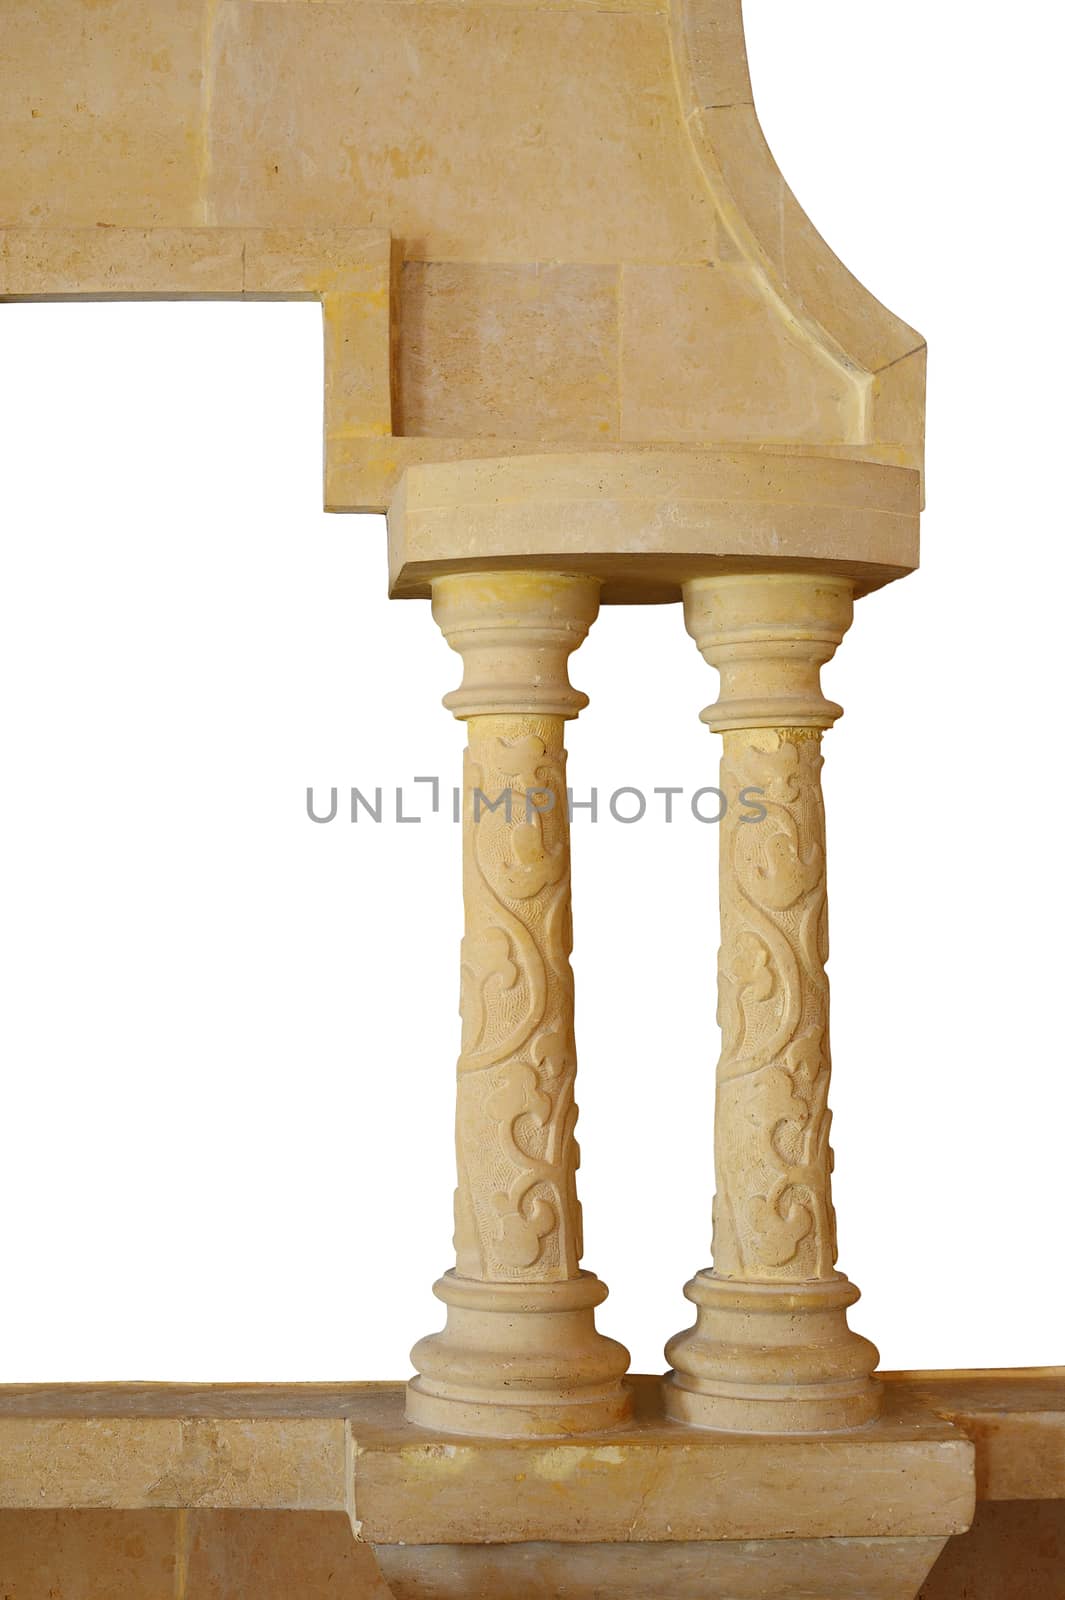 Architectural Columns with pattern isolated on white background.